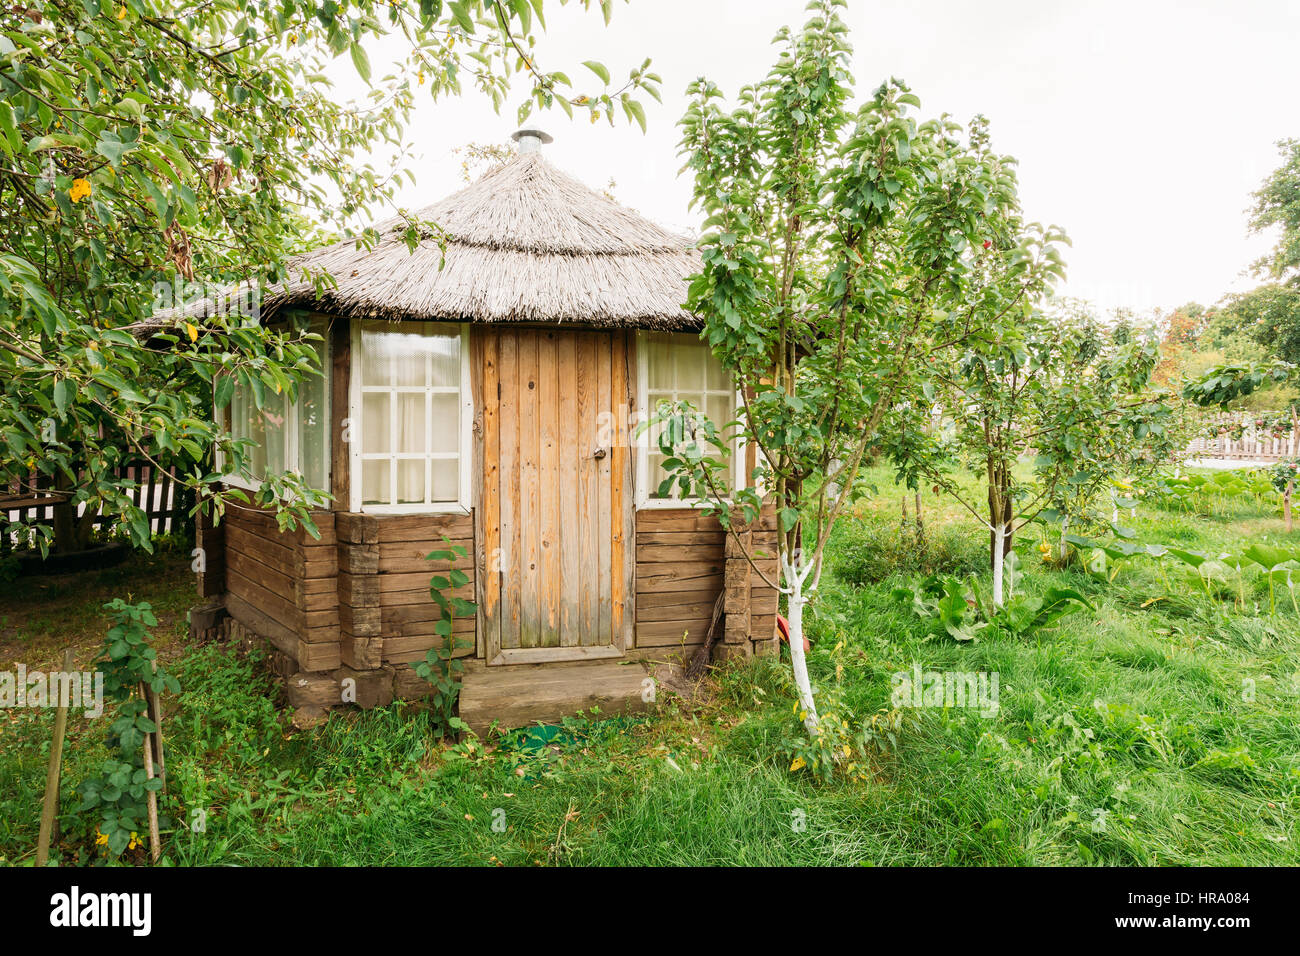 Small Belarusian Or Russian Wooden Guest House In Village Or Countryside Of Belarus Or Russia Countries At Summer Season. Stock Photo